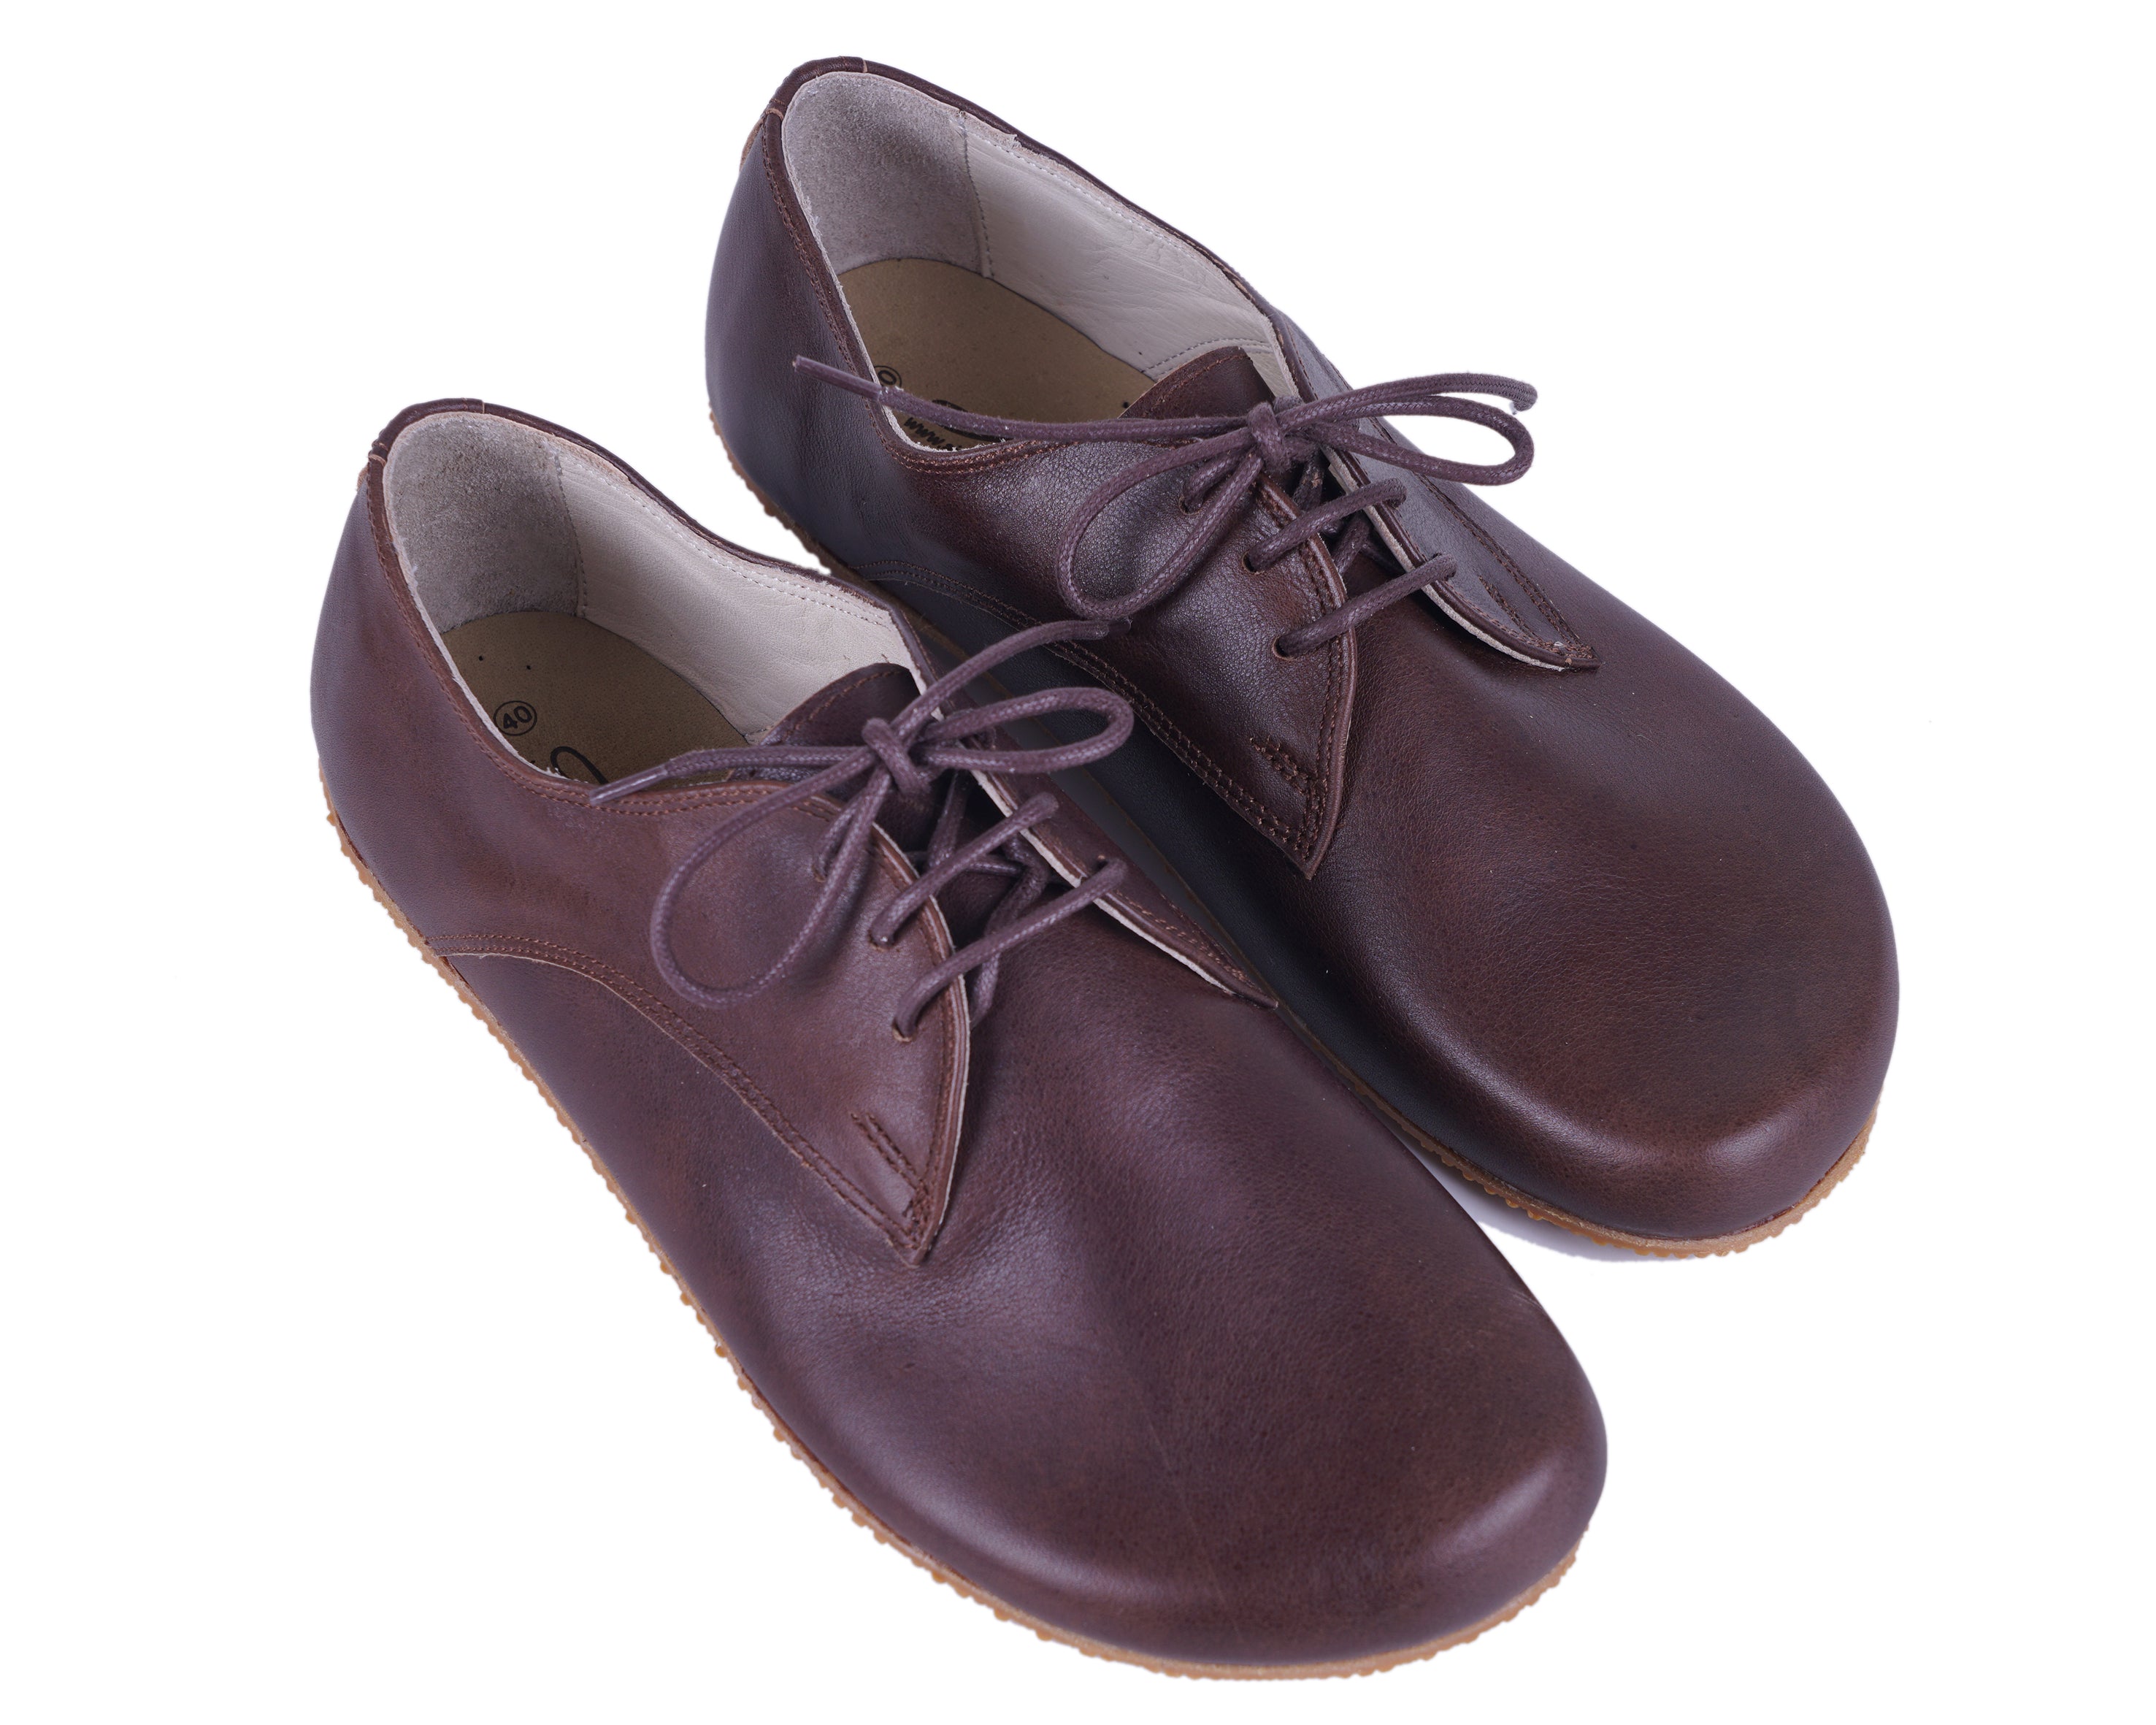 Dark Brown Oxford Wide Barefoot Shoes Smooth Leather Handmade 4mm Rubber Outsole